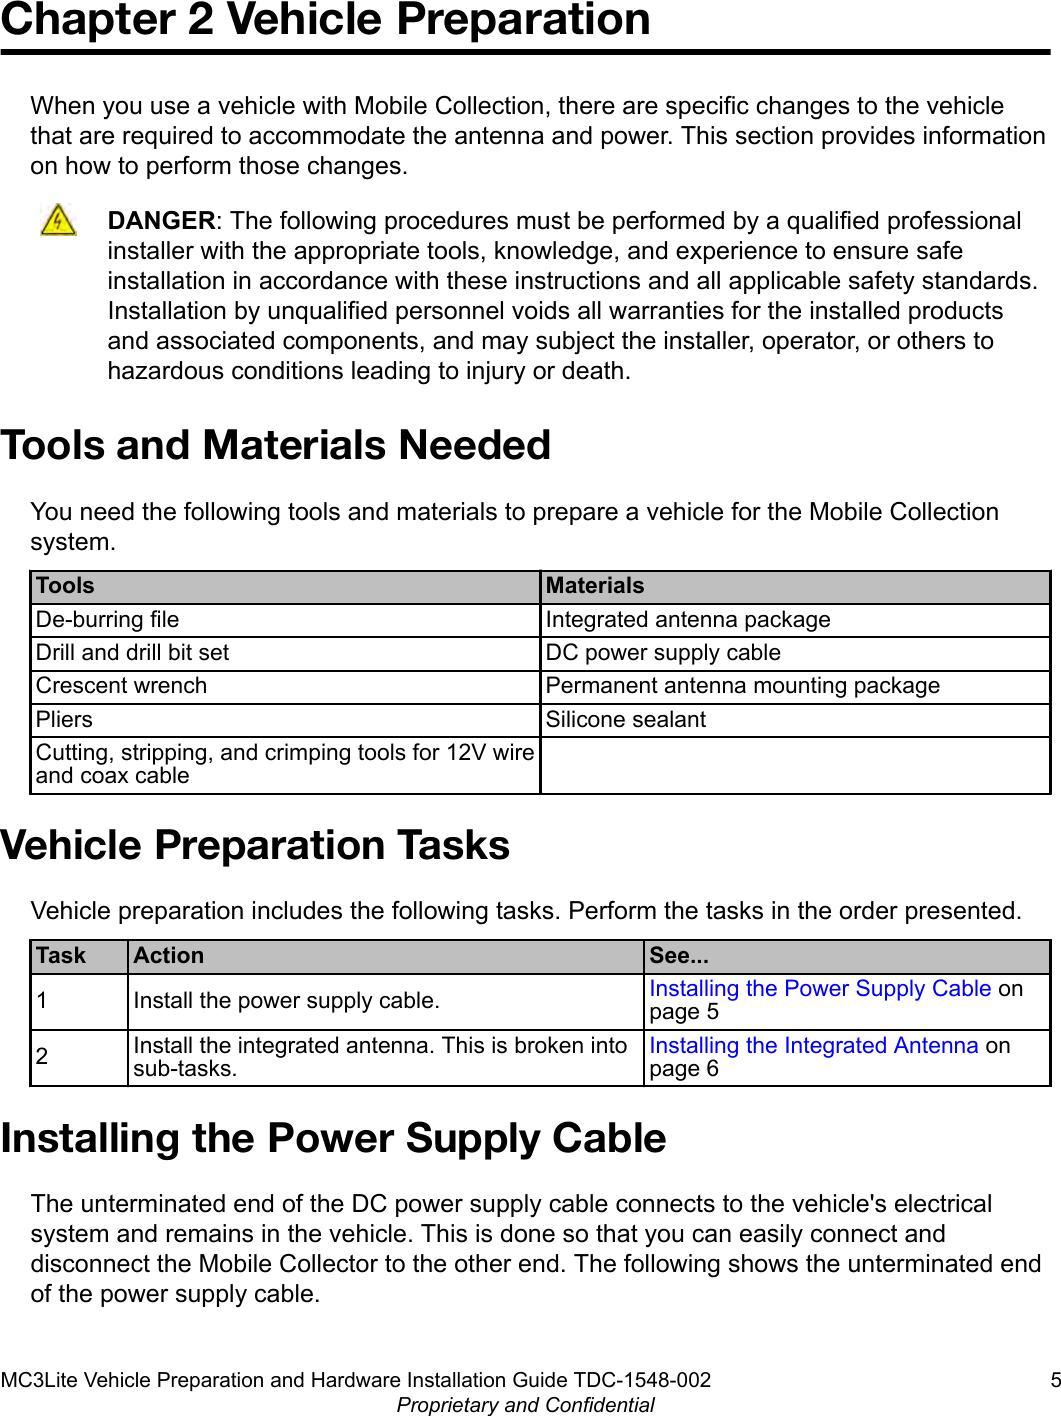 Chapter 2 Vehicle PreparationWhen you use a vehicle with Mobile Collection, there are specific changes to the vehiclethat are required to accommodate the antenna and power. This section provides informationon how to perform those changes.DANGER: The following procedures must be performed by a qualified professionalinstaller with the appropriate tools, knowledge, and experience to ensure safeinstallation in accordance with these instructions and all applicable safety standards.Installation by unqualified personnel voids all warranties for the installed productsand associated components, and may subject the installer, operator, or others tohazardous conditions leading to injury or death.Tools and Materials NeededYou need the following tools and materials to prepare a vehicle for the Mobile Collectionsystem.Tools MaterialsDe-burring file Integrated antenna packageDrill and drill bit set DC power supply cableCrescent wrench Permanent antenna mounting packagePliers Silicone sealantCutting, stripping, and crimping tools for 12V wireand coax cable Vehicle Preparation TasksVehicle preparation includes the following tasks. Perform the tasks in the order presented.Task Action See...1 Install the power supply cable. Installing the Power Supply Cable onpage 52Install the integrated antenna. This is broken intosub-tasks.Installing the Integrated Antenna onpage 6Installing the Power Supply CableThe unterminated end of the DC power supply cable connects to the vehicle&apos;s electricalsystem and remains in the vehicle. This is done so that you can easily connect anddisconnect the Mobile Collector to the other end. The following shows the unterminated endof the power supply cable.MC3Lite Vehicle Preparation and Hardware Installation Guide TDC-1548-002 5Proprietary and Confidential